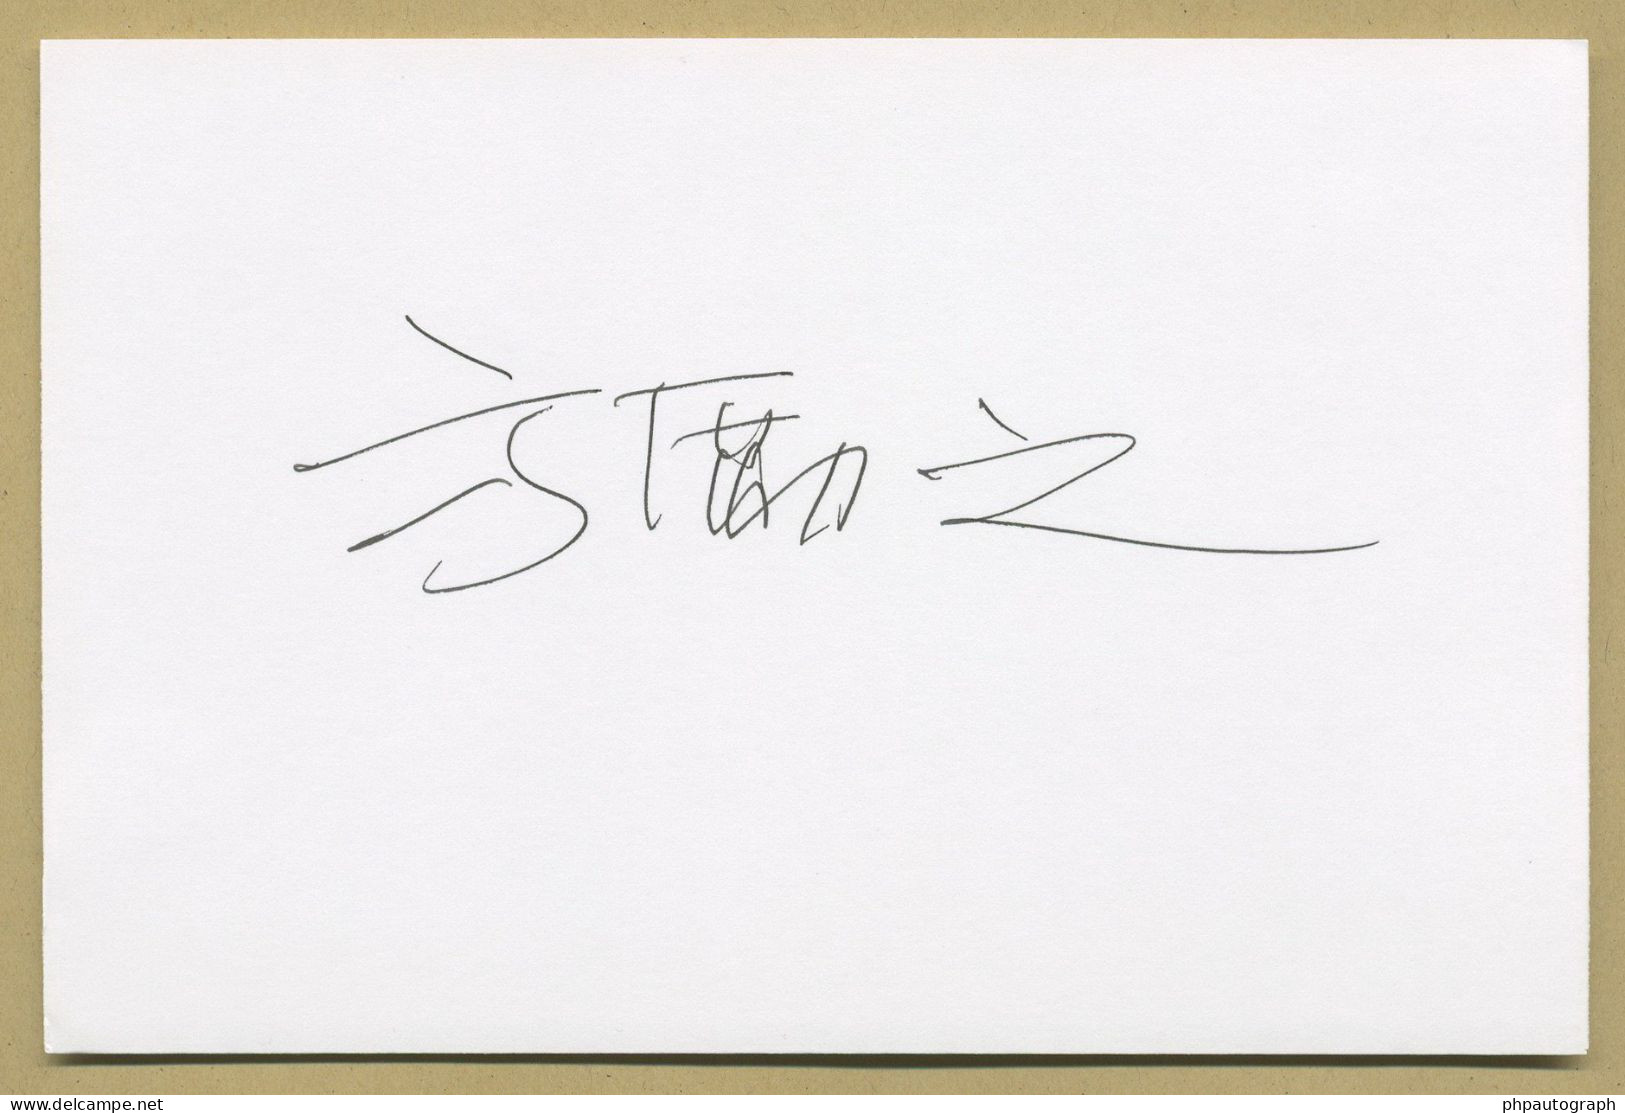 Fang Lizhi (1936-2012) - Chinese Astrophysicist & Dissident - Signed Card + Photo - 90s - Inventors & Scientists